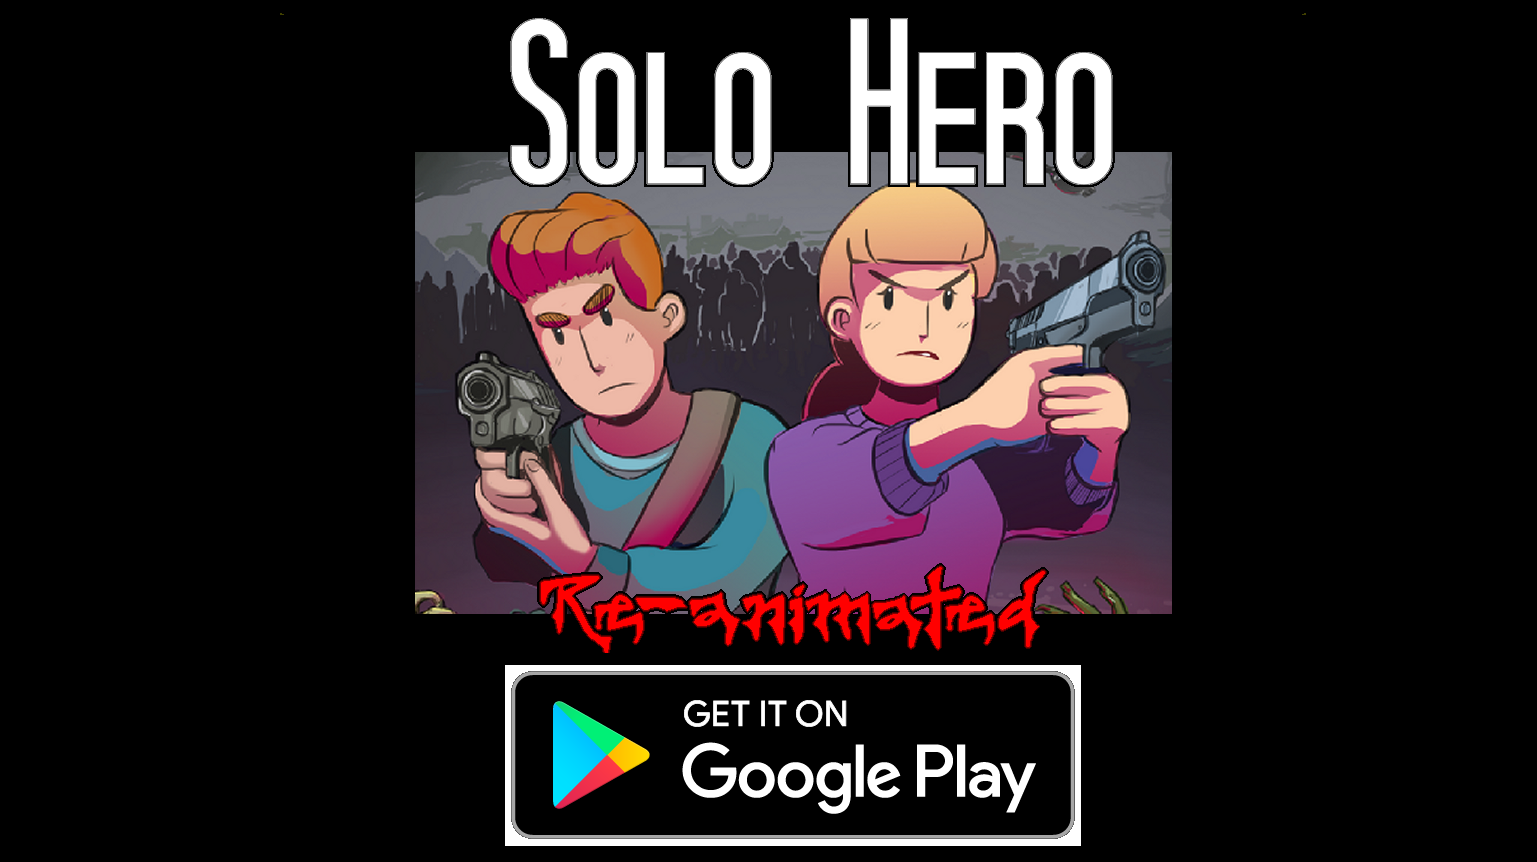 Google Play Store link